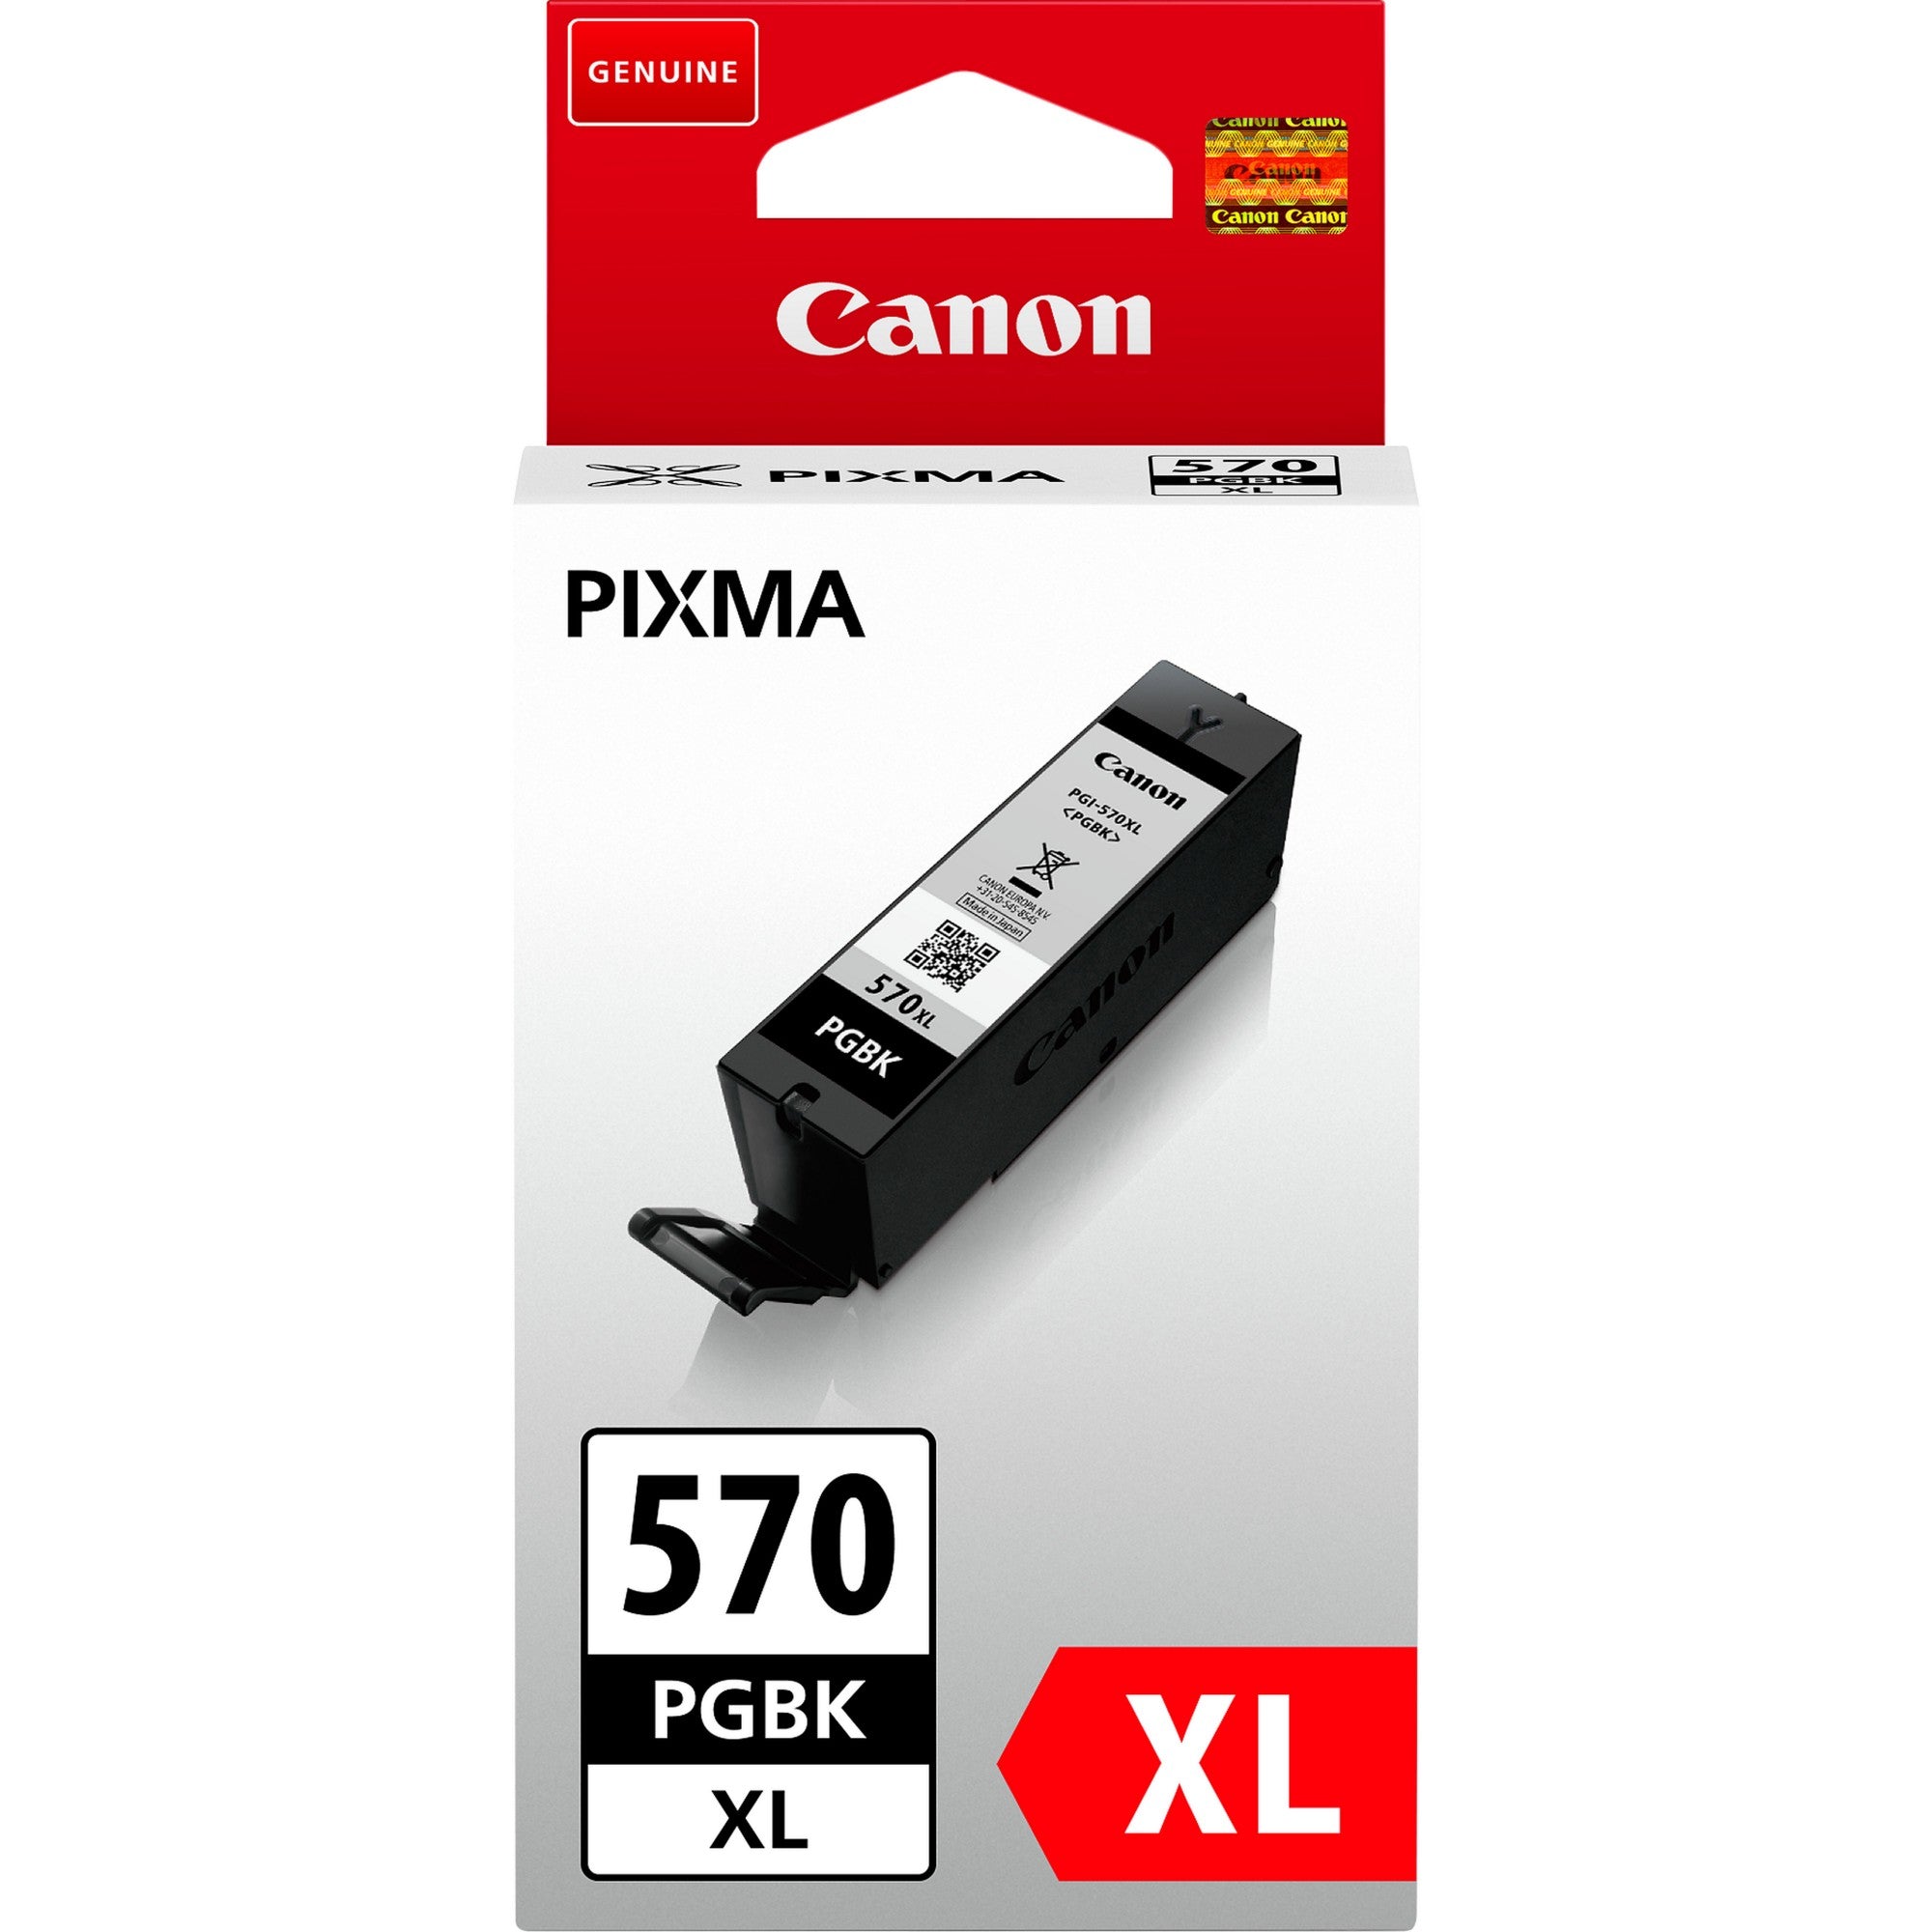 Canon 0318C001/PGI-570PGBKXL Ink cartridge black high-capacity pigmented, 500 pages ISO/IEC 24711 22.2ml for Canon Pixma MG 5750/7750